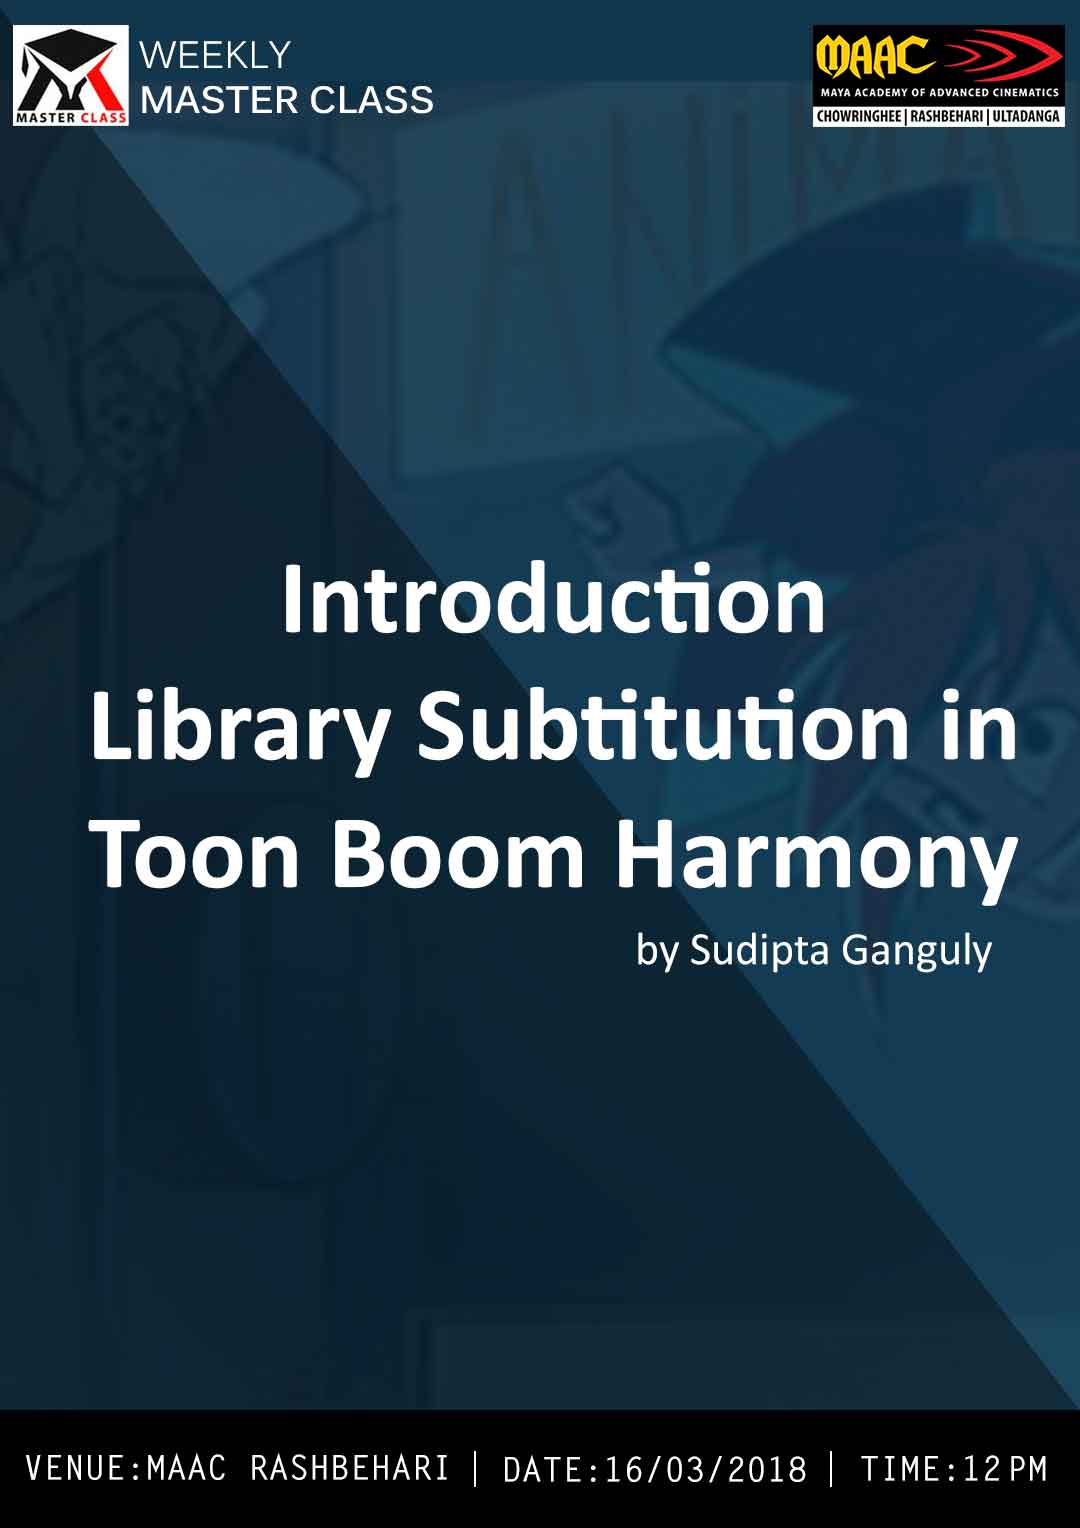 Weekly Master Class on Introduction Library Subtitution in Toon Boom Harmony